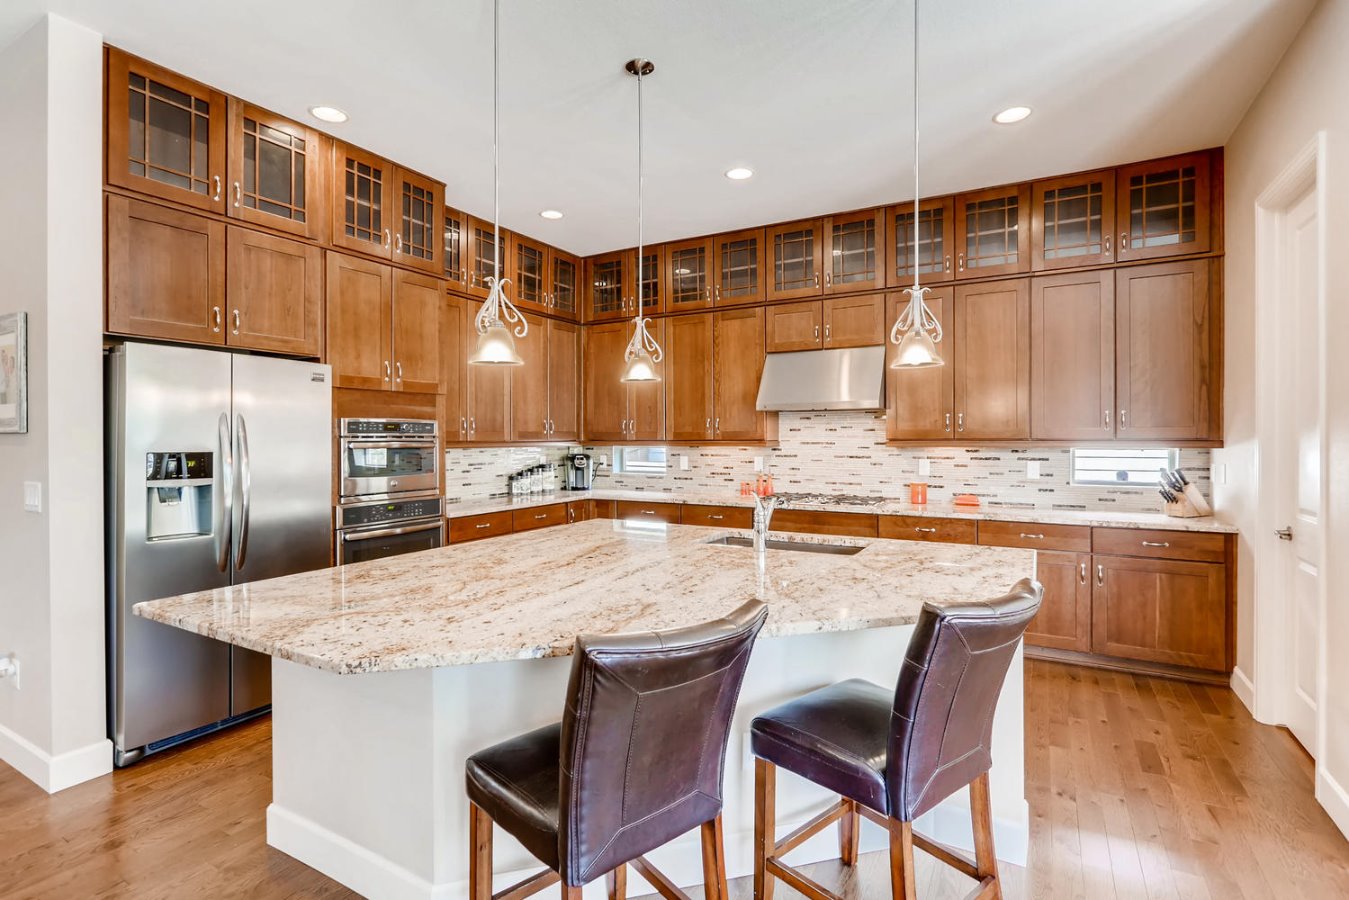 Stunning 10 foot cabinetry!